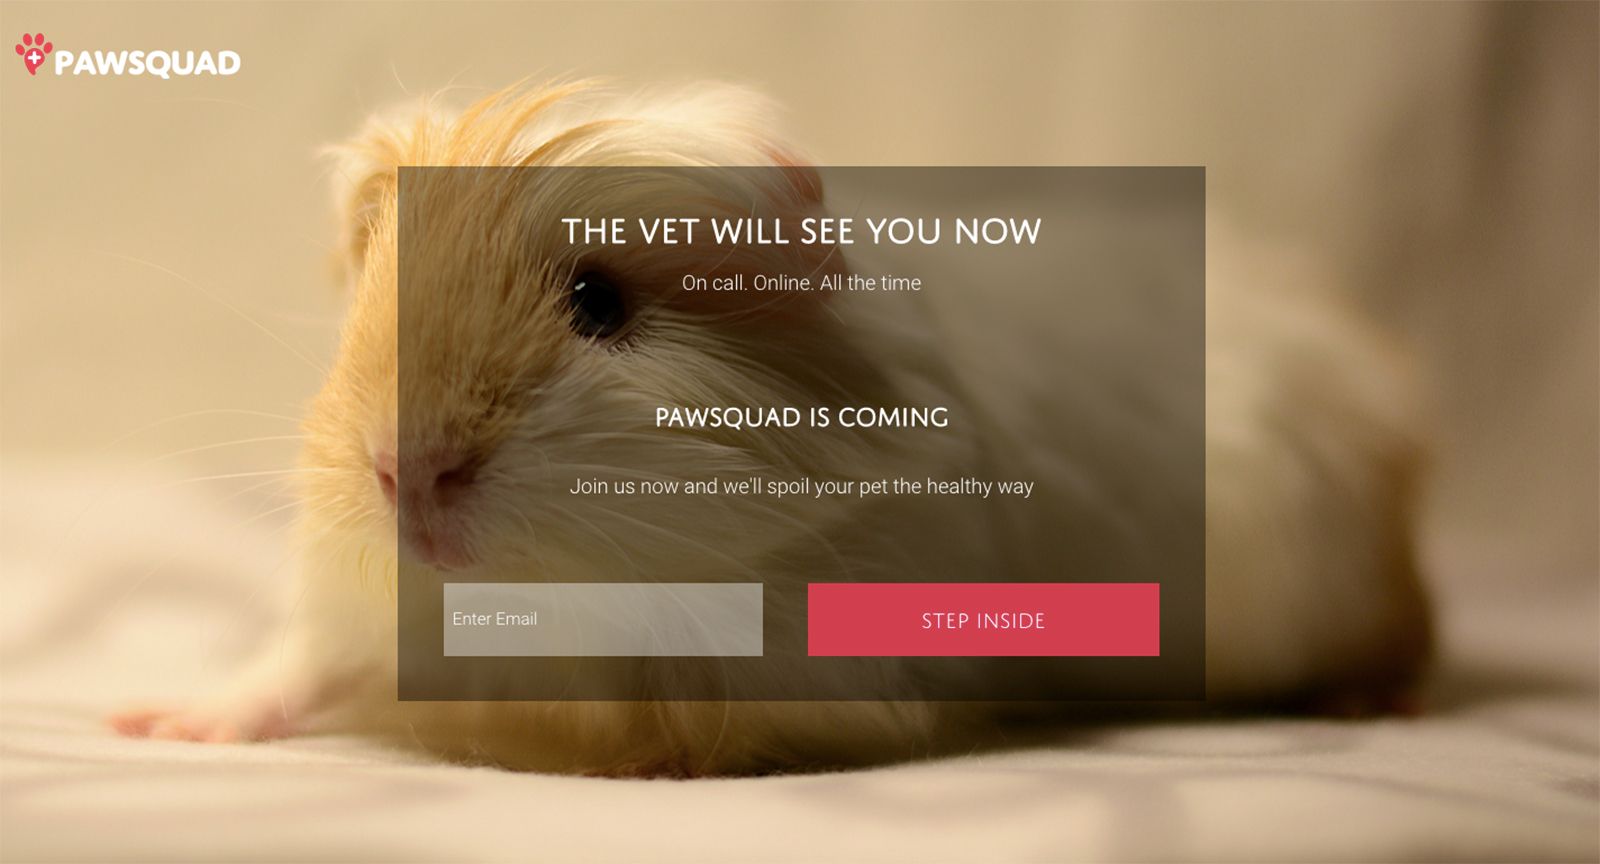 pawsquad lets you visit the vet from your couch at home goodbye pet box image 1